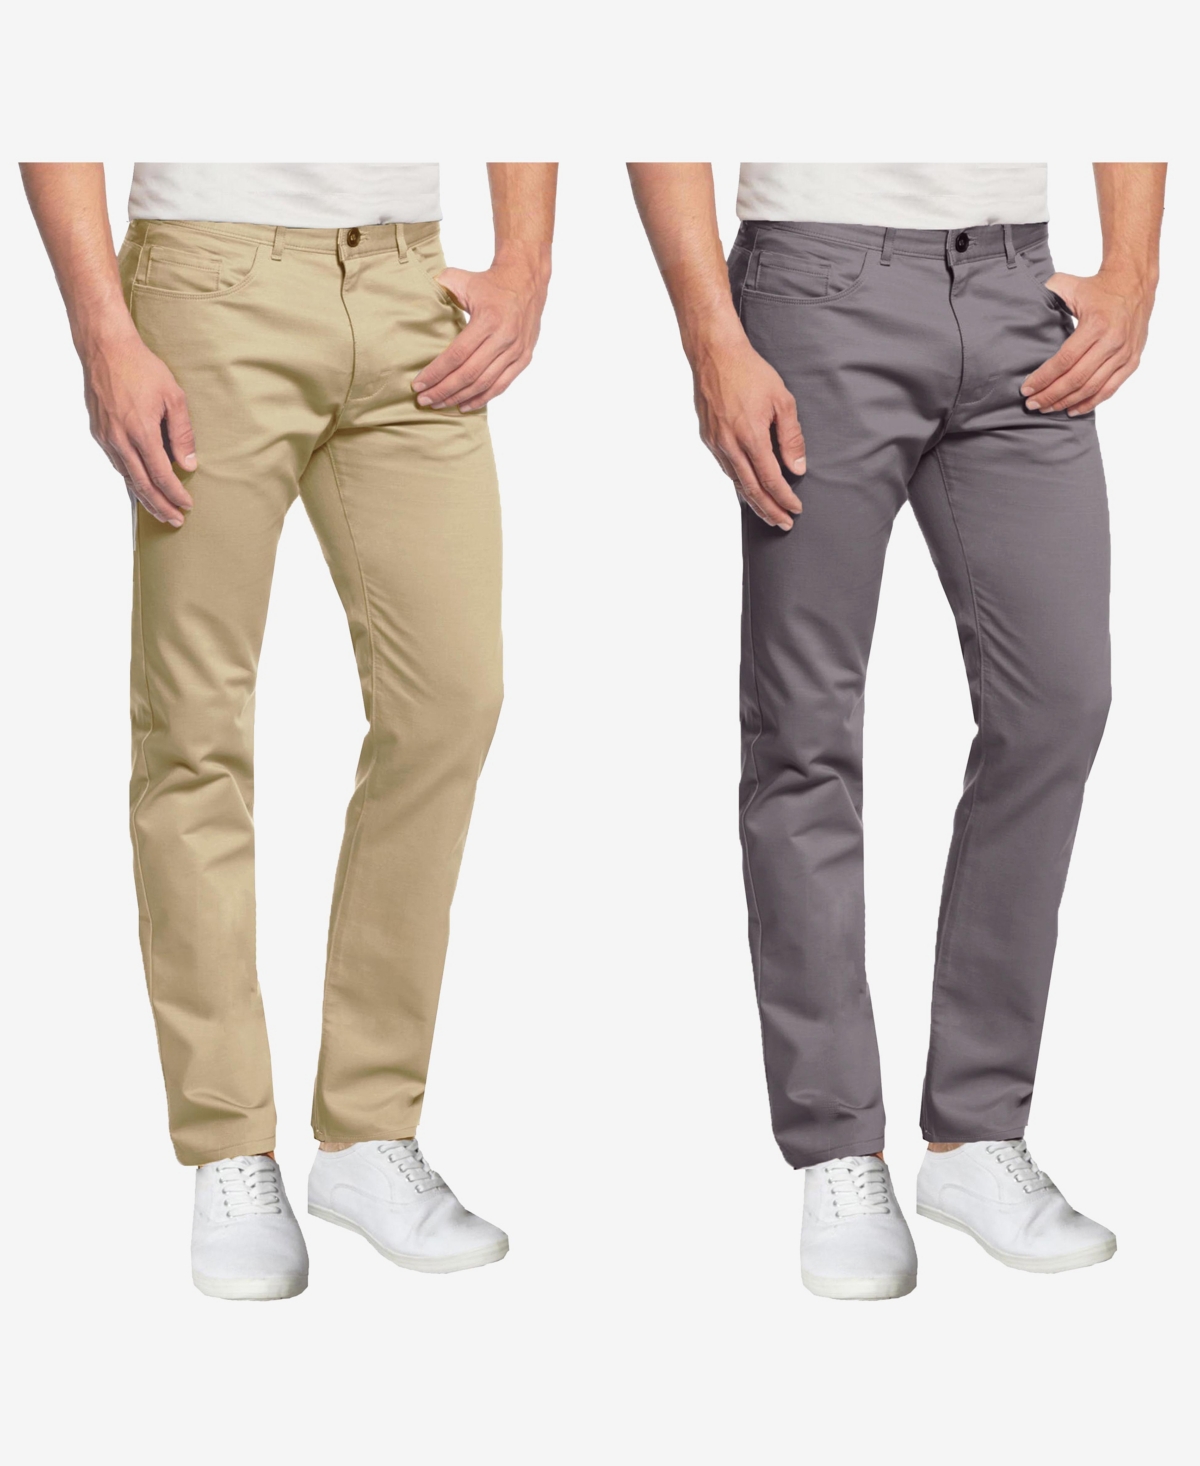 Galaxy By Harvic Men's 5-pocket Ultra-stretch Skinny Fit Chino Pants, Pack Of 2 In Dark Gray,khaki